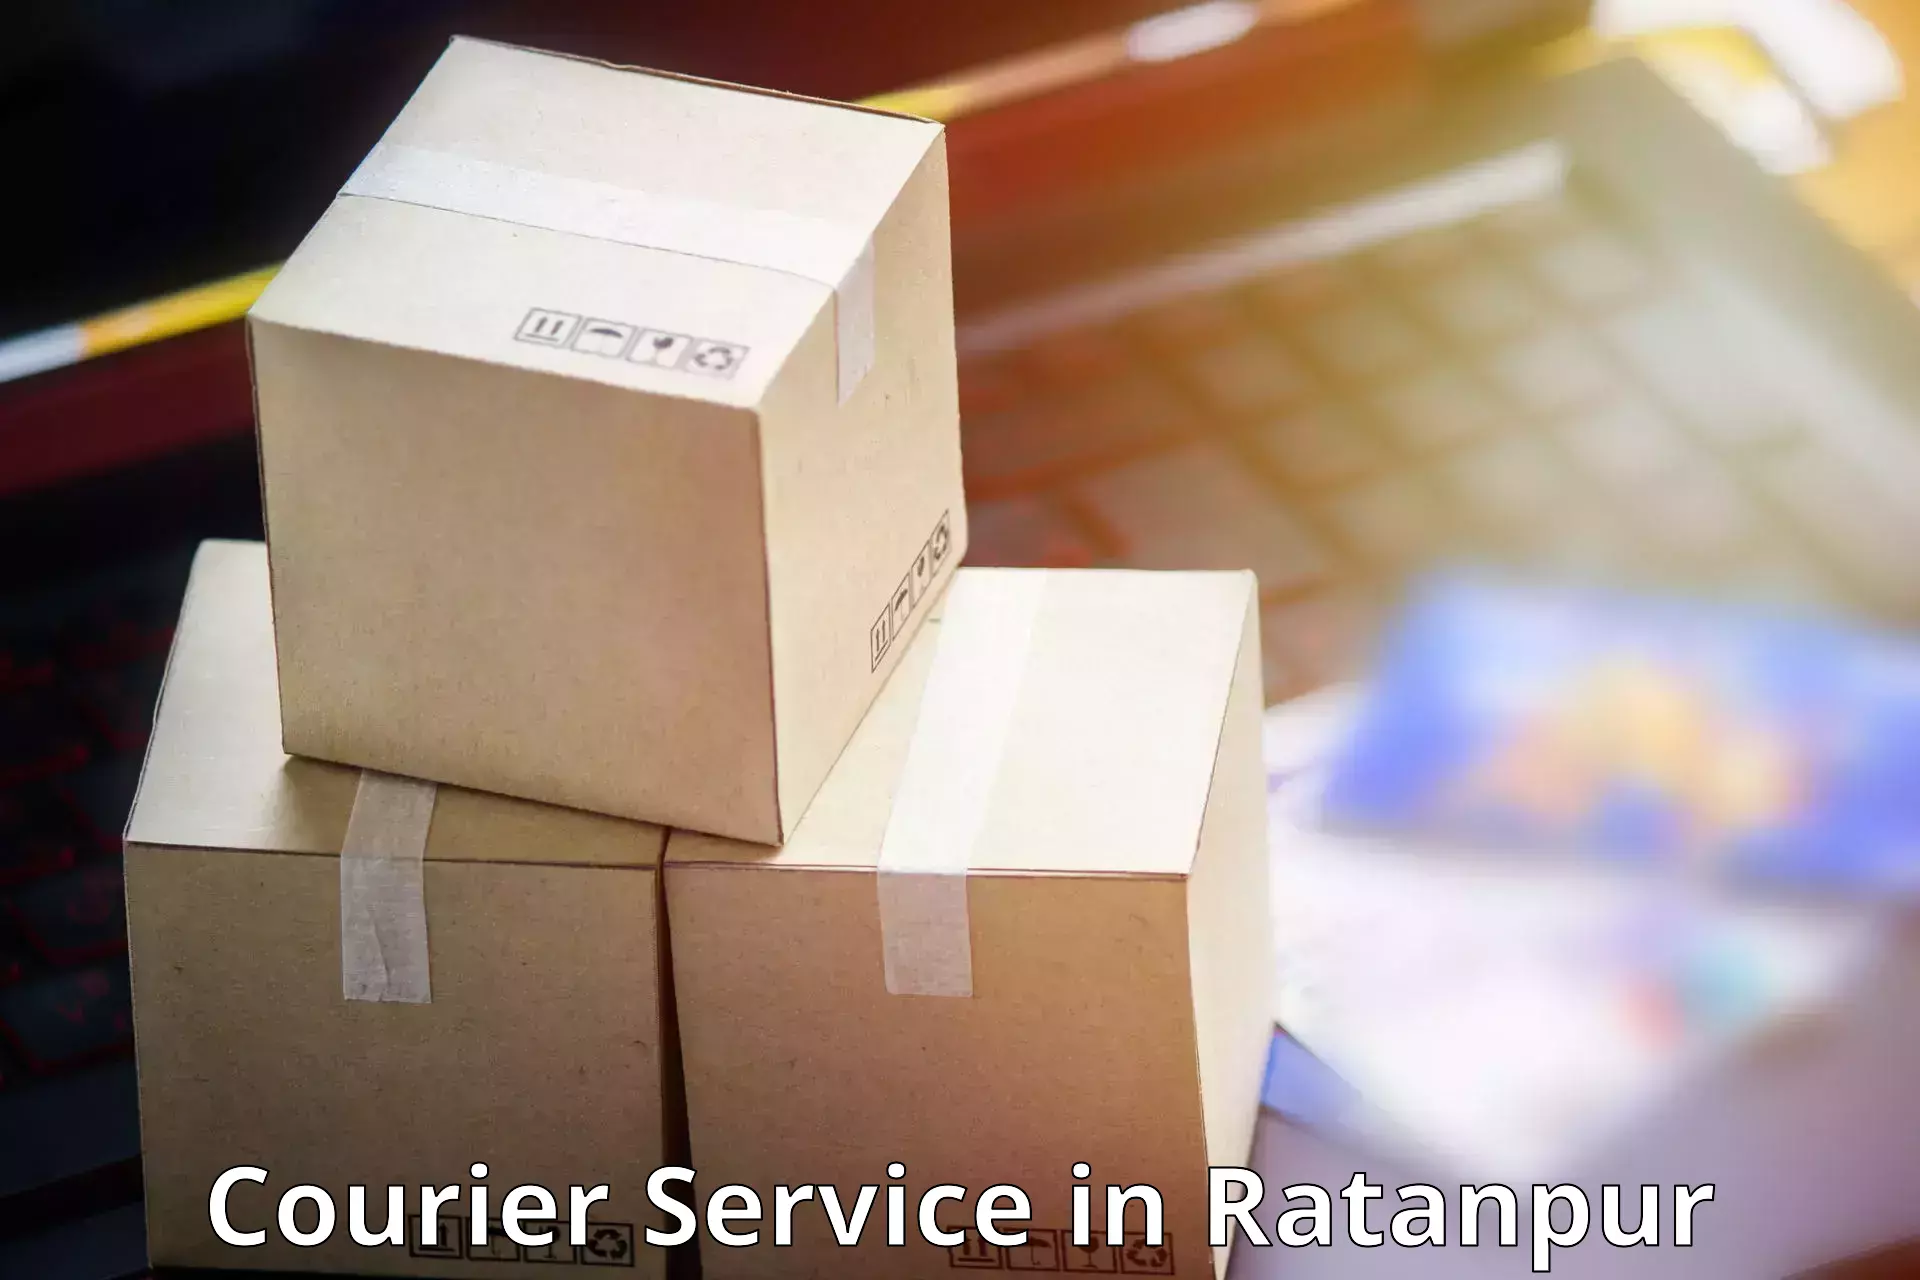 Efficient parcel delivery in Ratanpur